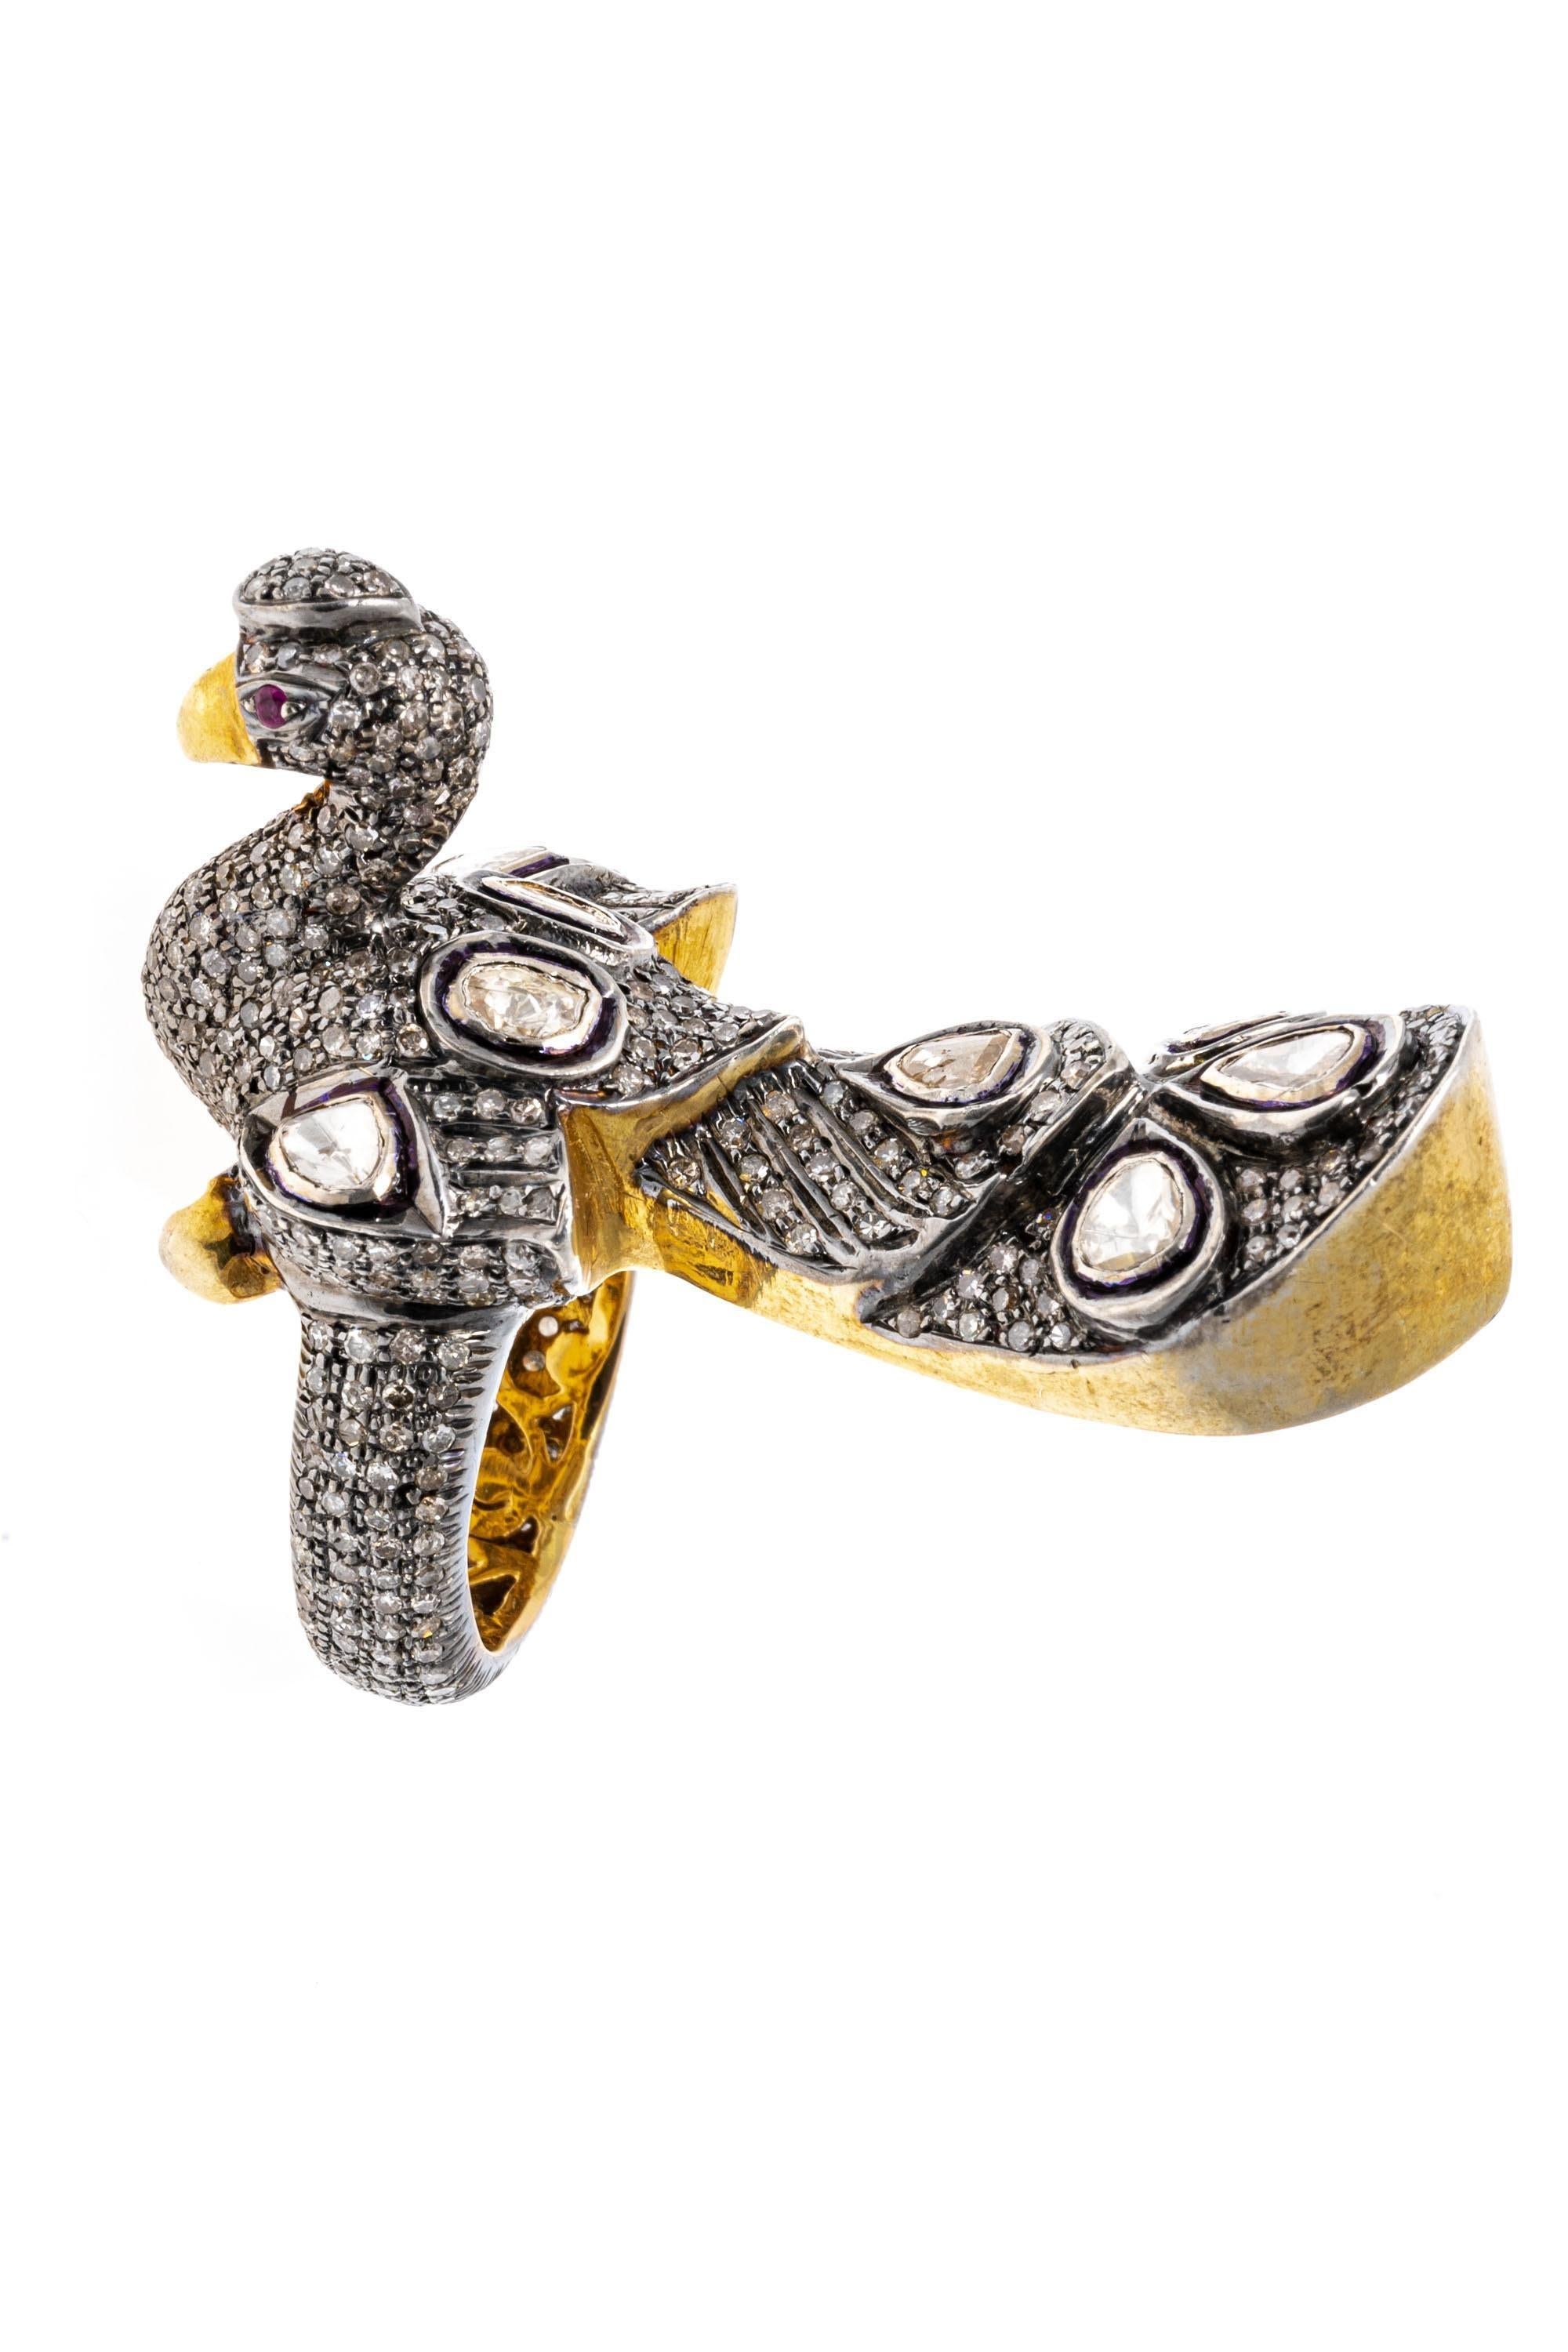 Alighting breakthrough of the Mythical Phoenix Silver Ring with Gems T –  Peter Stone Jewelry